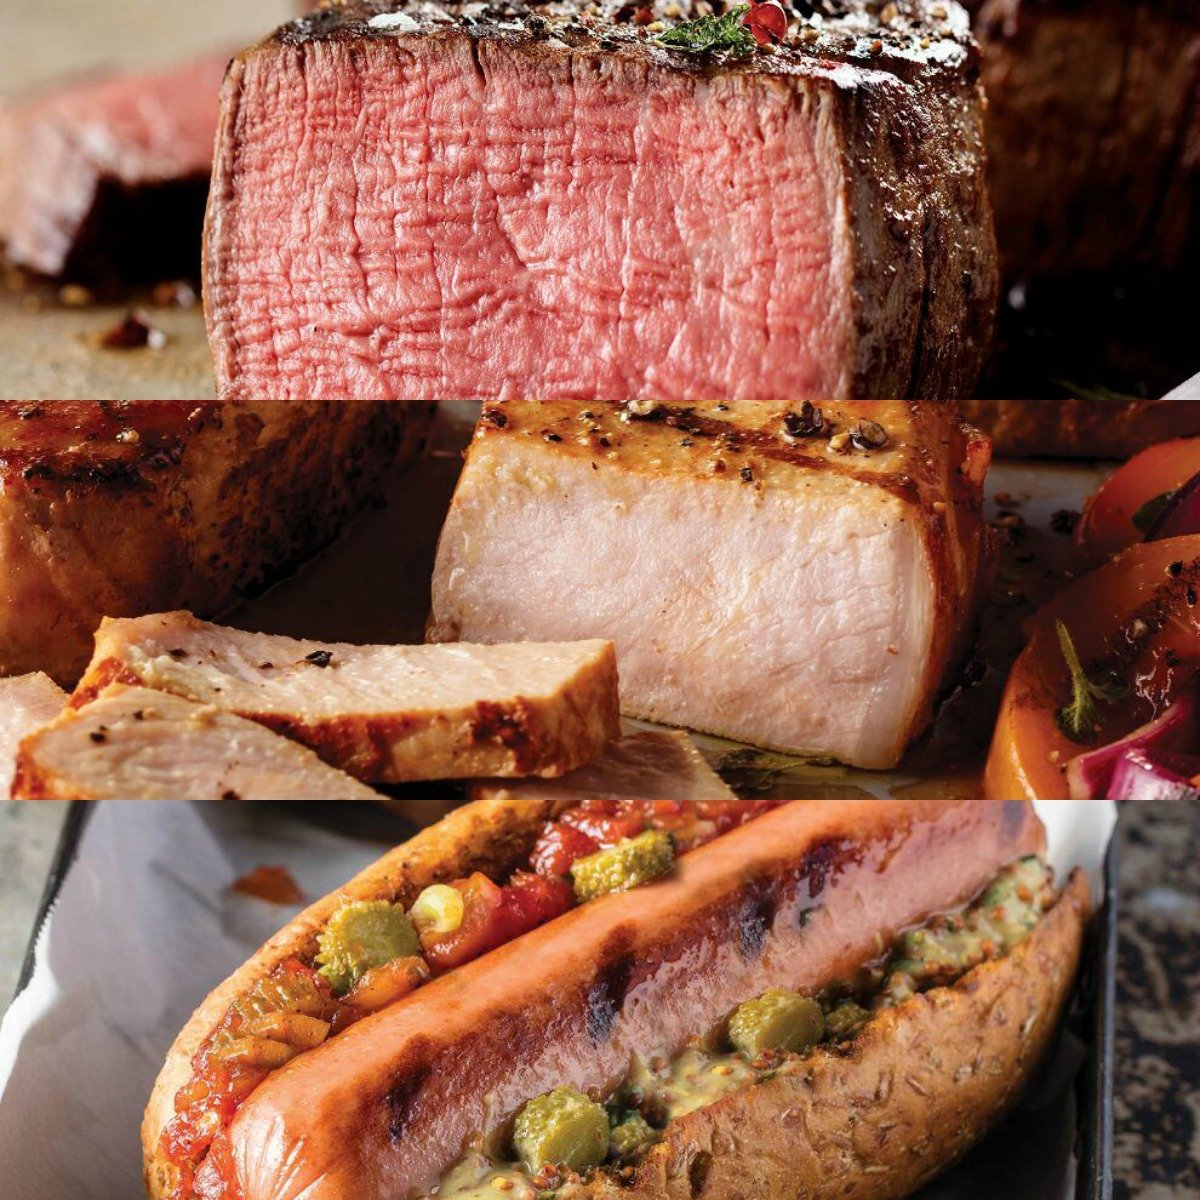 Grand Pack (24 Total Items) $89.99 (54% off) @ Omaha Steaks